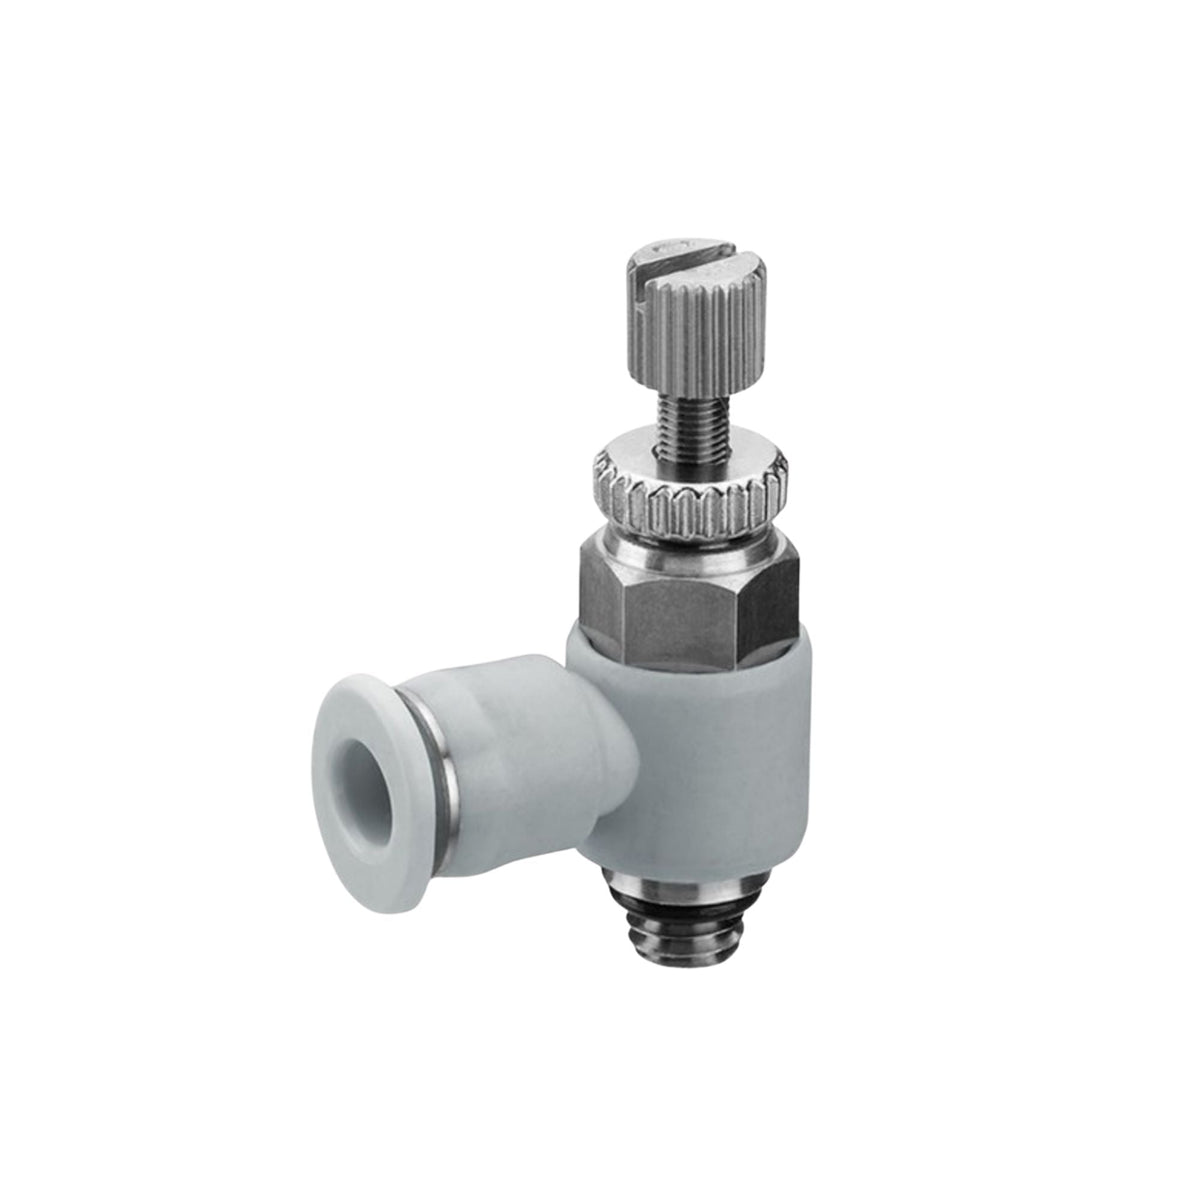 90 degree check valve fitting with adjustable knob on top, male thread on the bottom and female push in on the side